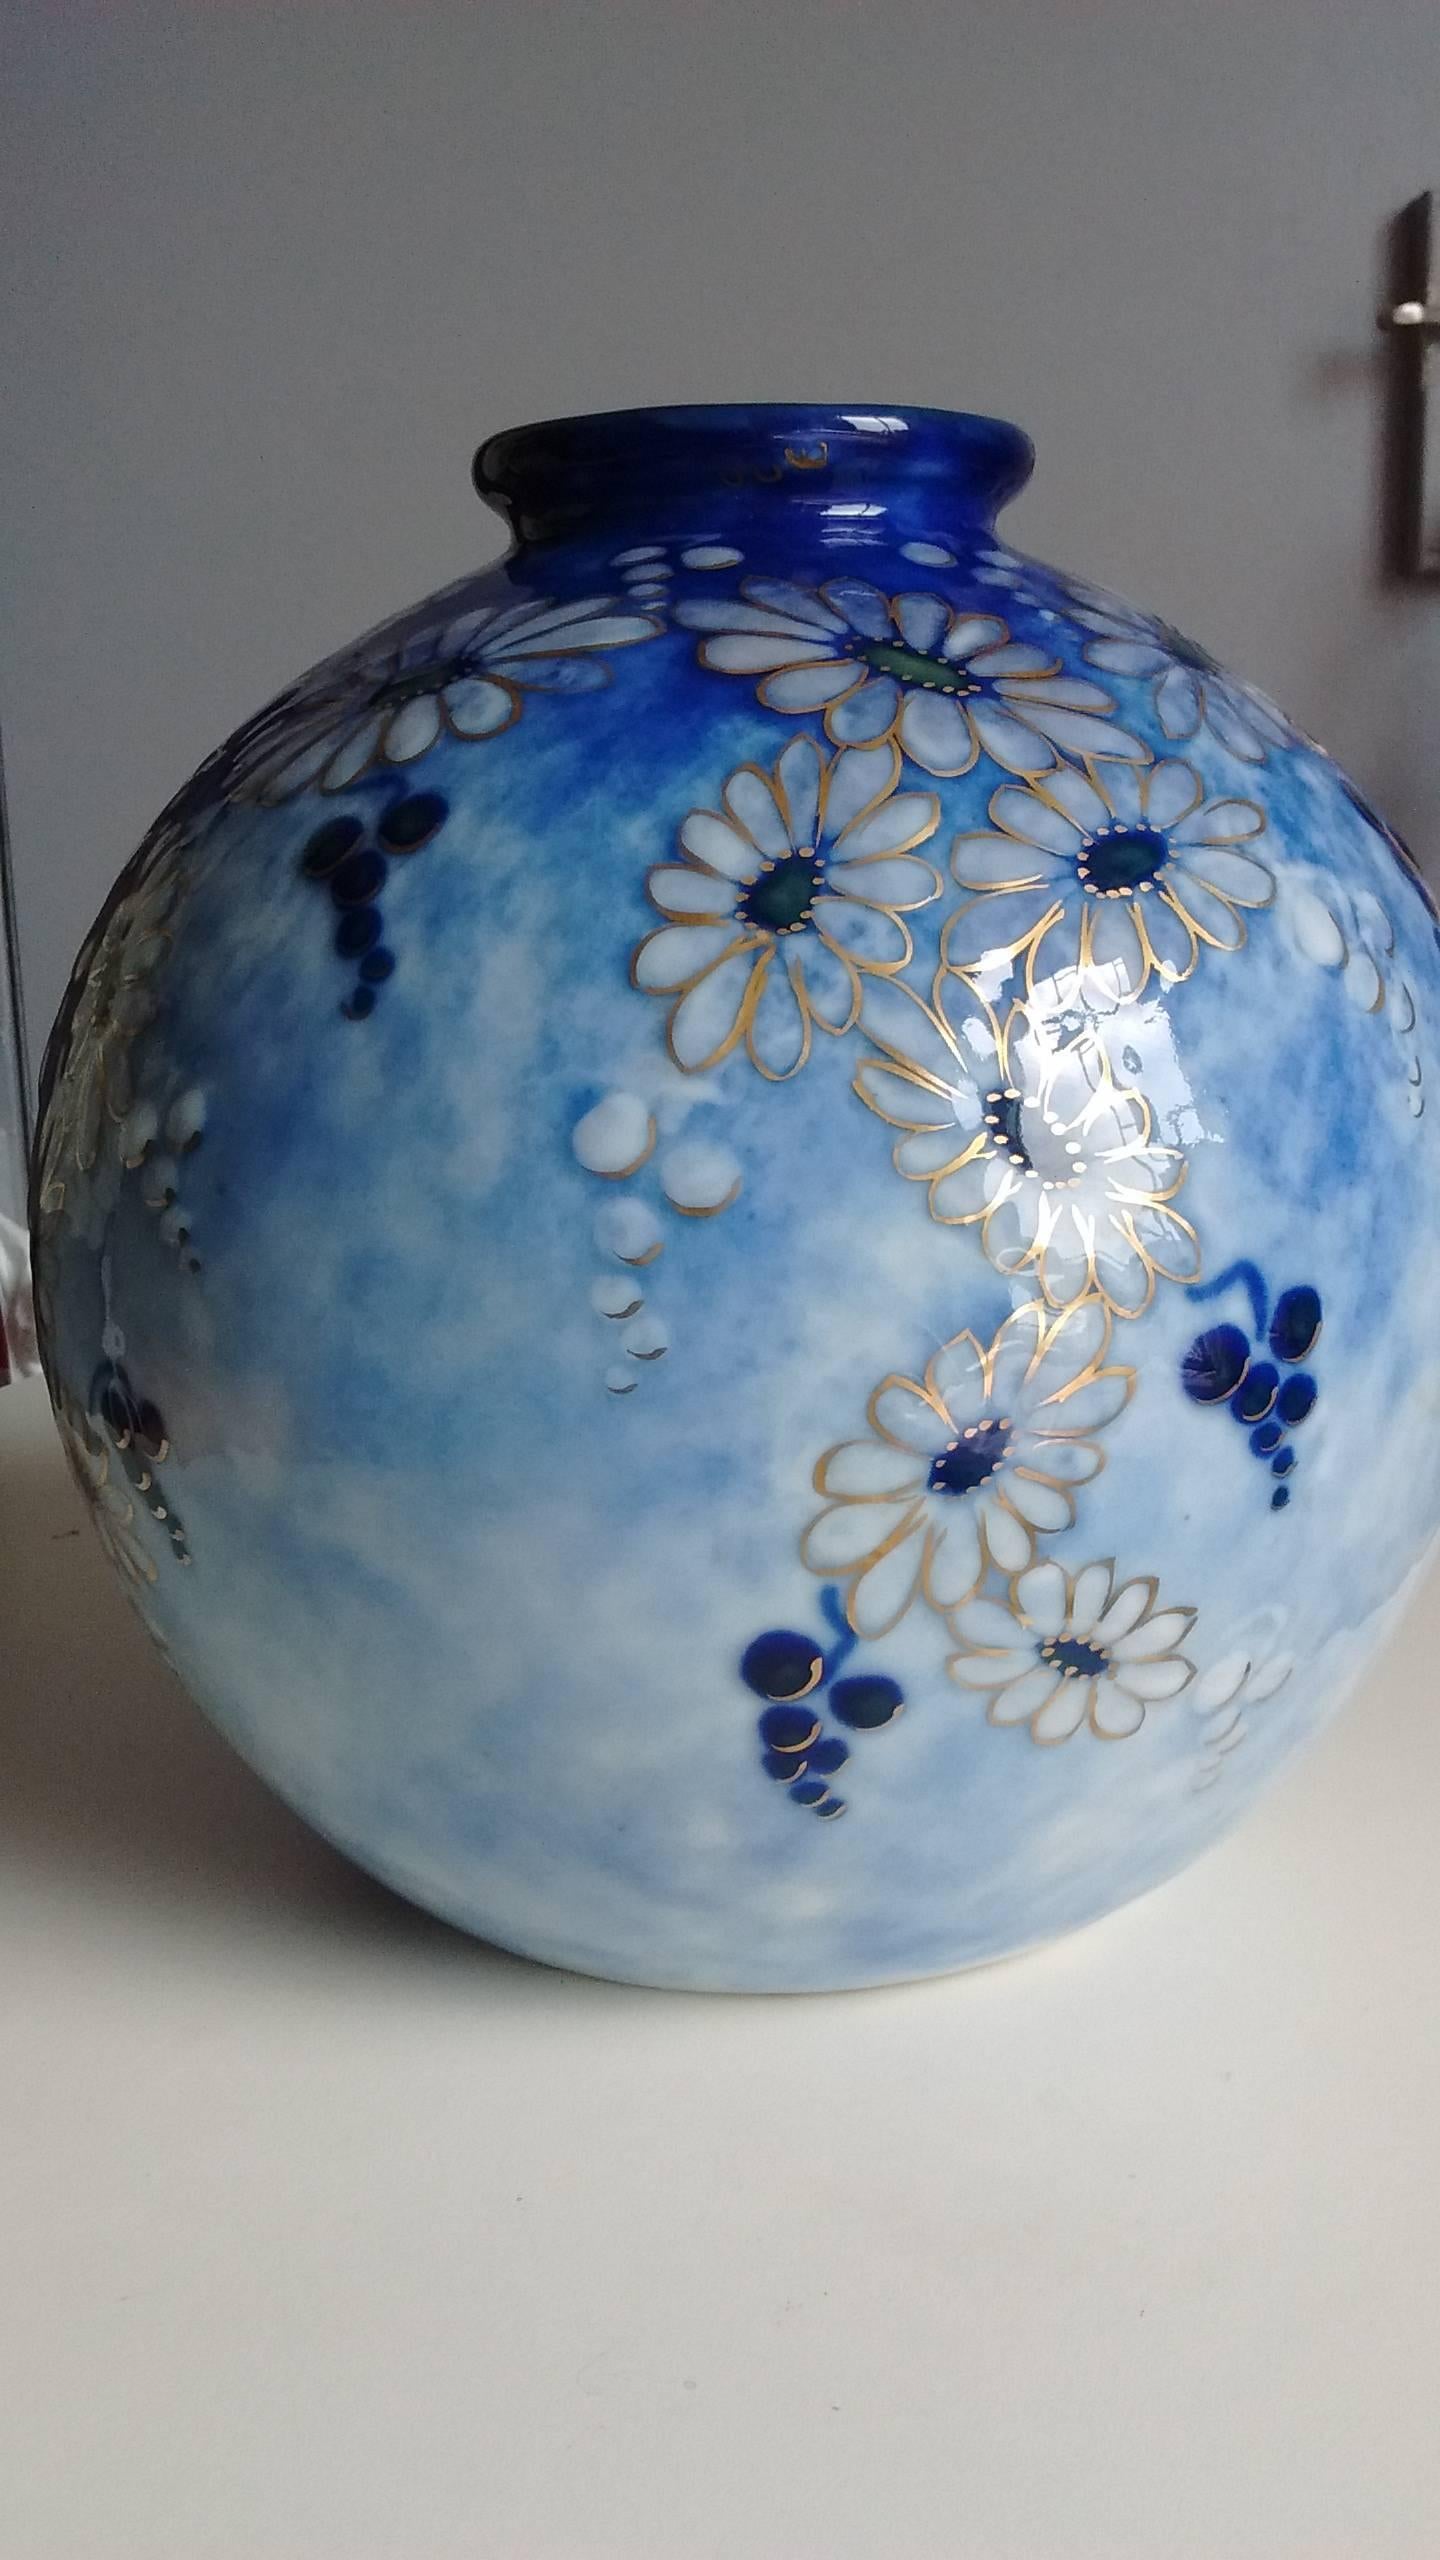 Porcelain vase with spherical body and hemmed neck. Decorative stylized flowers with a green heart slightly raised on a blue enamelled background marbled with shades of dark to light, contours enhanced with gold.
Signed Tharaud Limoges France, Made